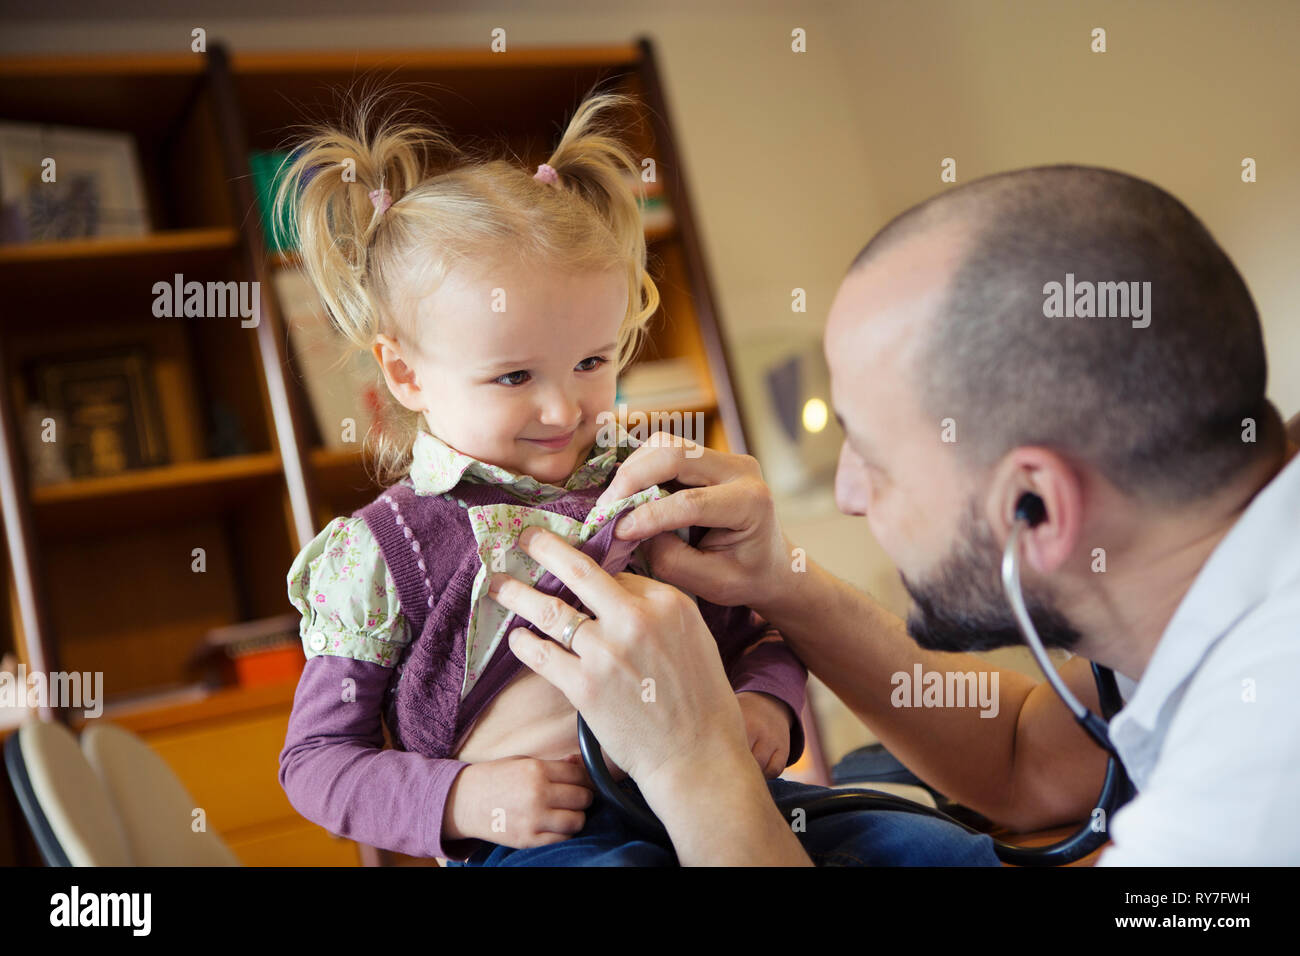 Doctor using a stethoscope to listen to a child's heartbeat Stock Photo